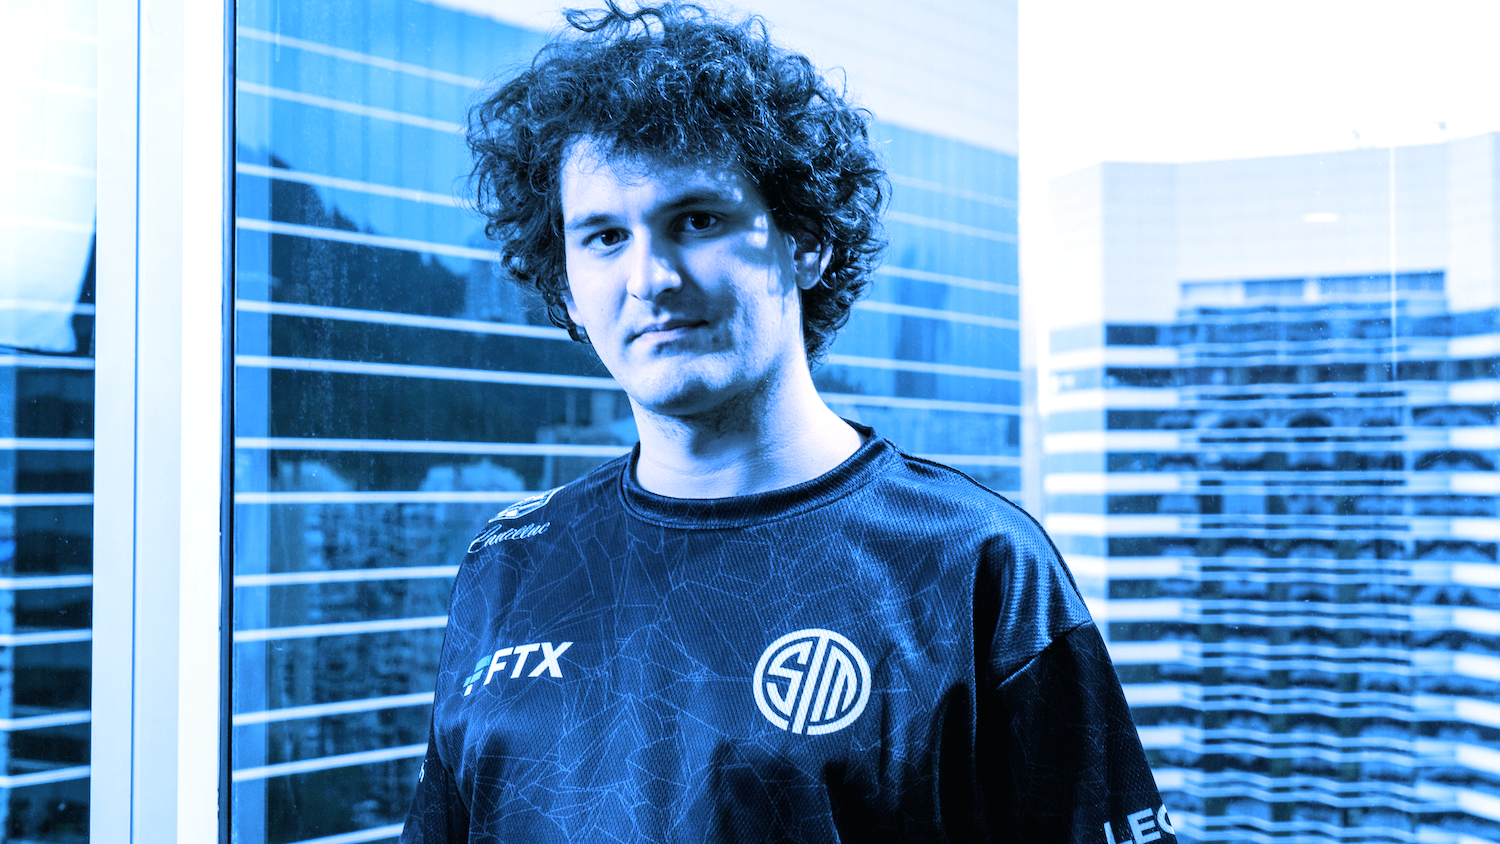 FTX CEO Sam Bankman-Fried sporting his TSM jersey. Image: FTX